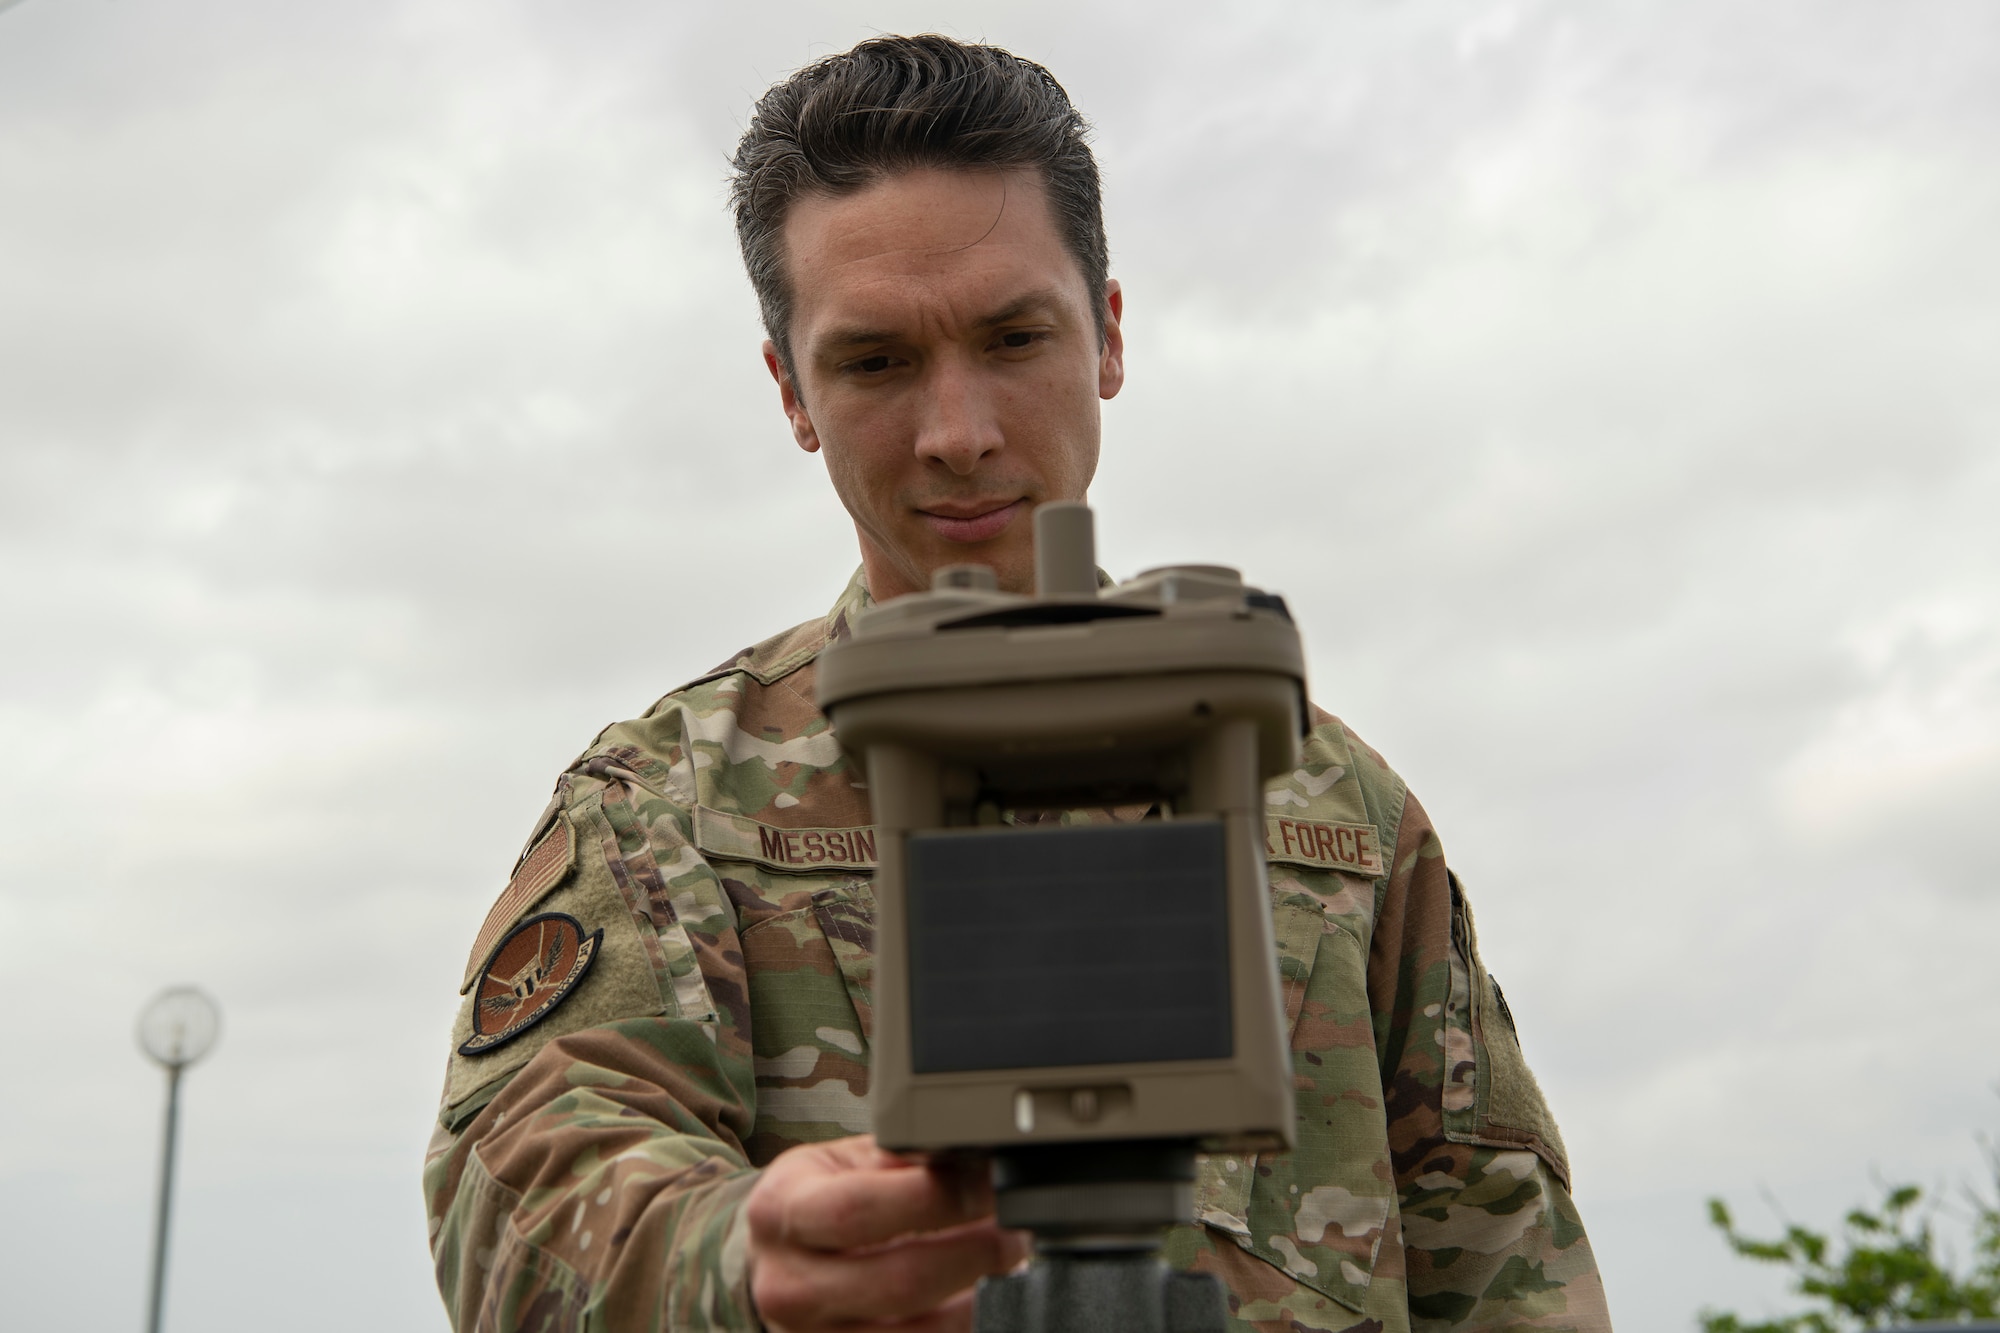 Senior Airman Thomas Messina, 18th Operations Support Squadron weather journeyman, inspects a micro weather sensor Mar. 26, 2020, at Kadena Air Base, Japan. Messina took measurements after a shift change ensuring his information was up-to-date for continued flight operations at Kadena AB. (U.S. Air Force photo by Senior Airman Rhett Isbell)